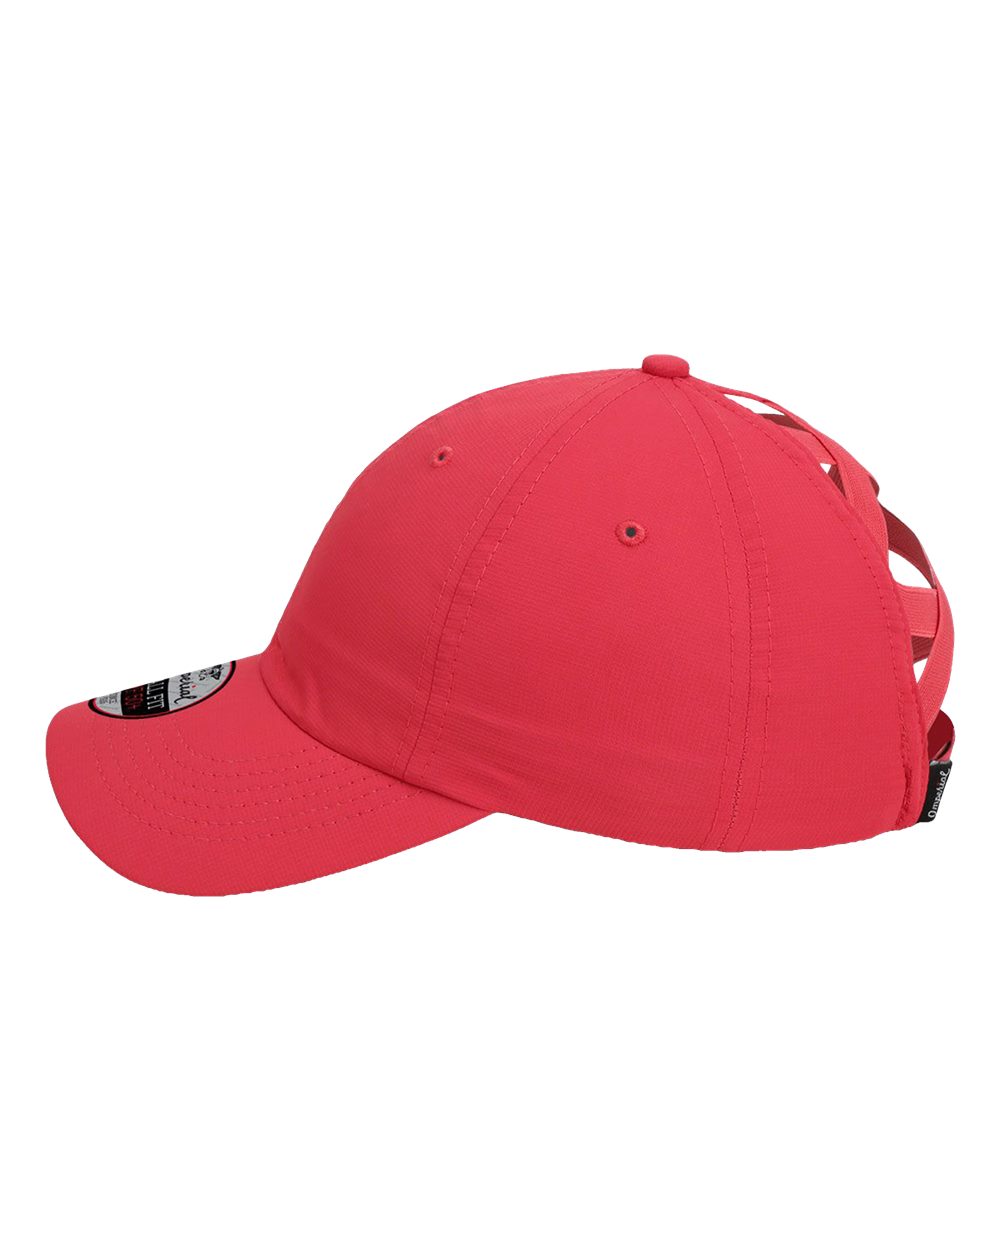 Imperial L338 - The Hinsen Performance Ponytail Cap